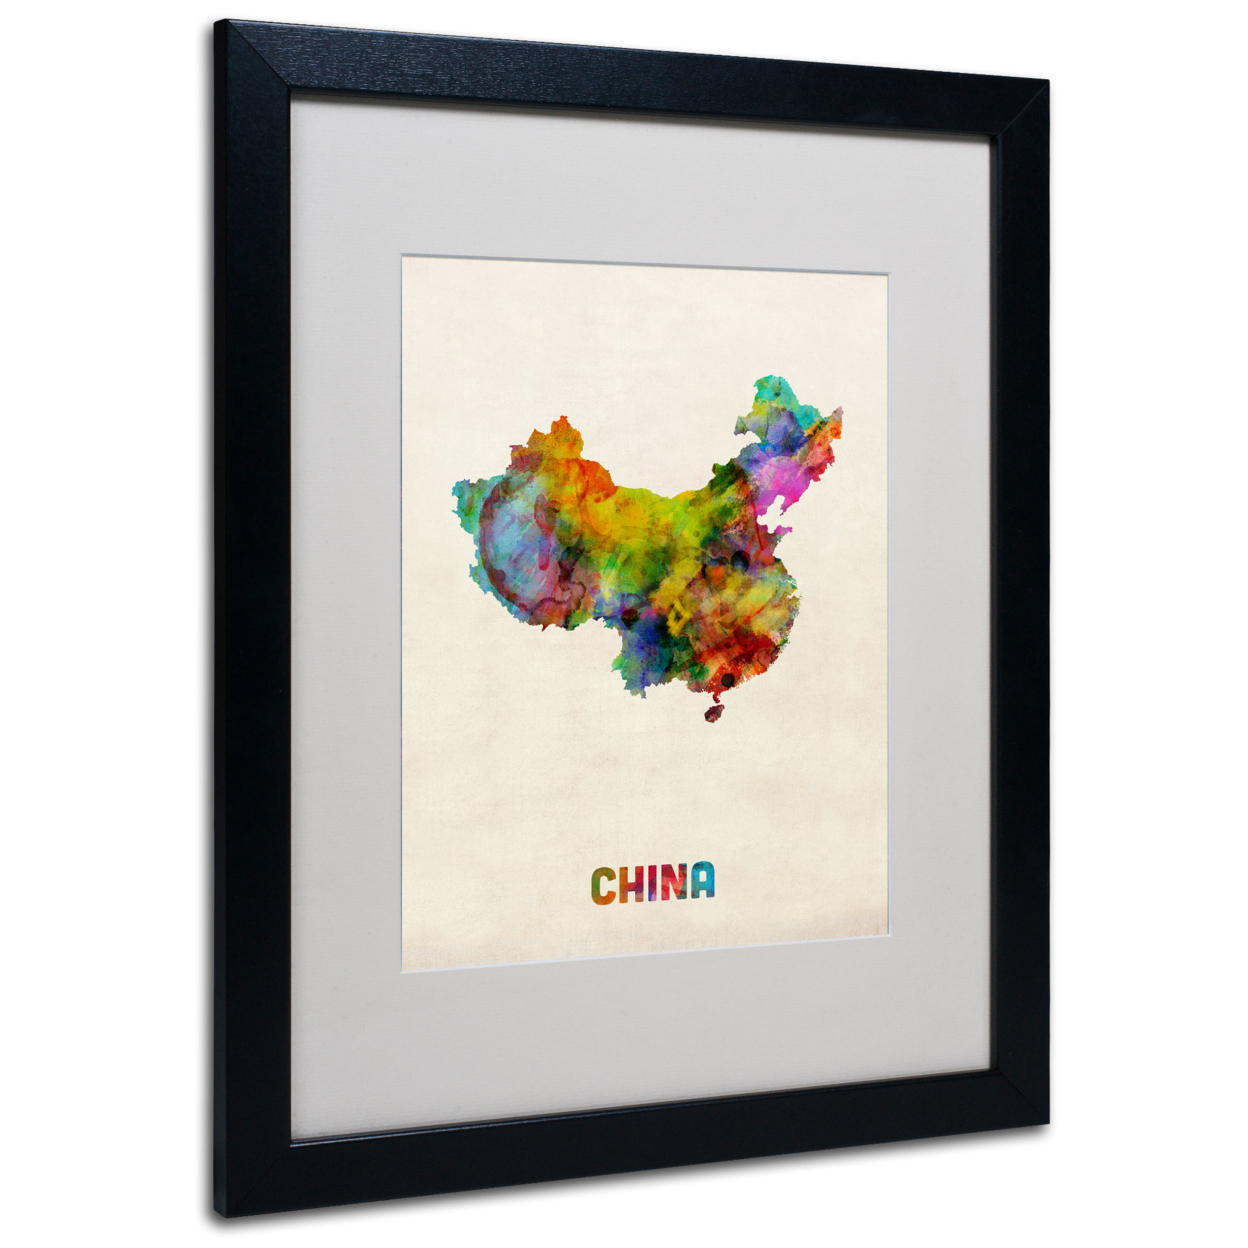 Michael Tompsett 'China Watercolor Map' Black Wooden Framed Art 18 X 22 Inches